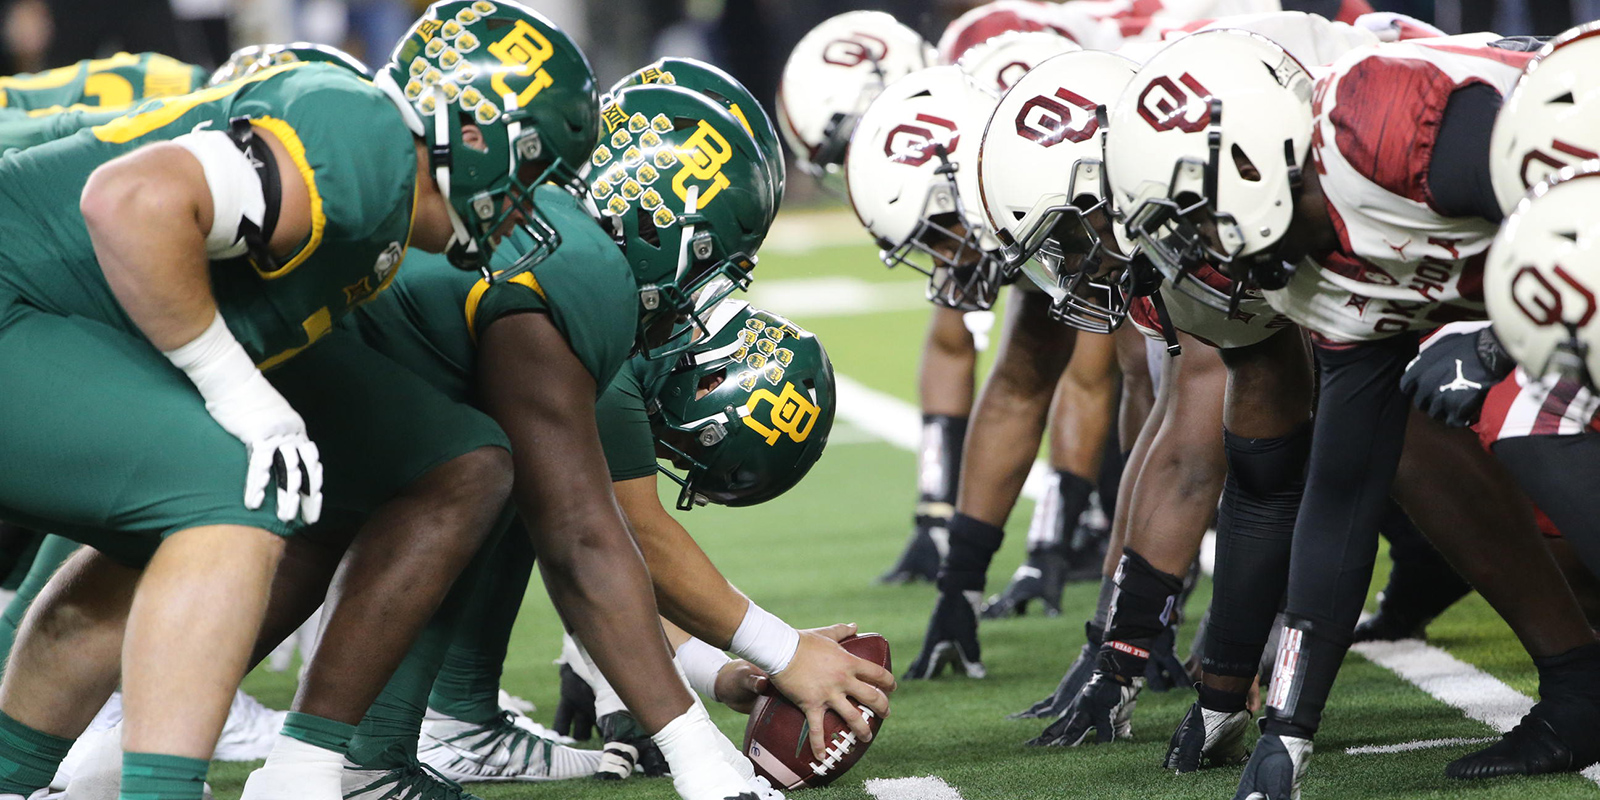 Baylor and Oklahoma football players lined up for the snap